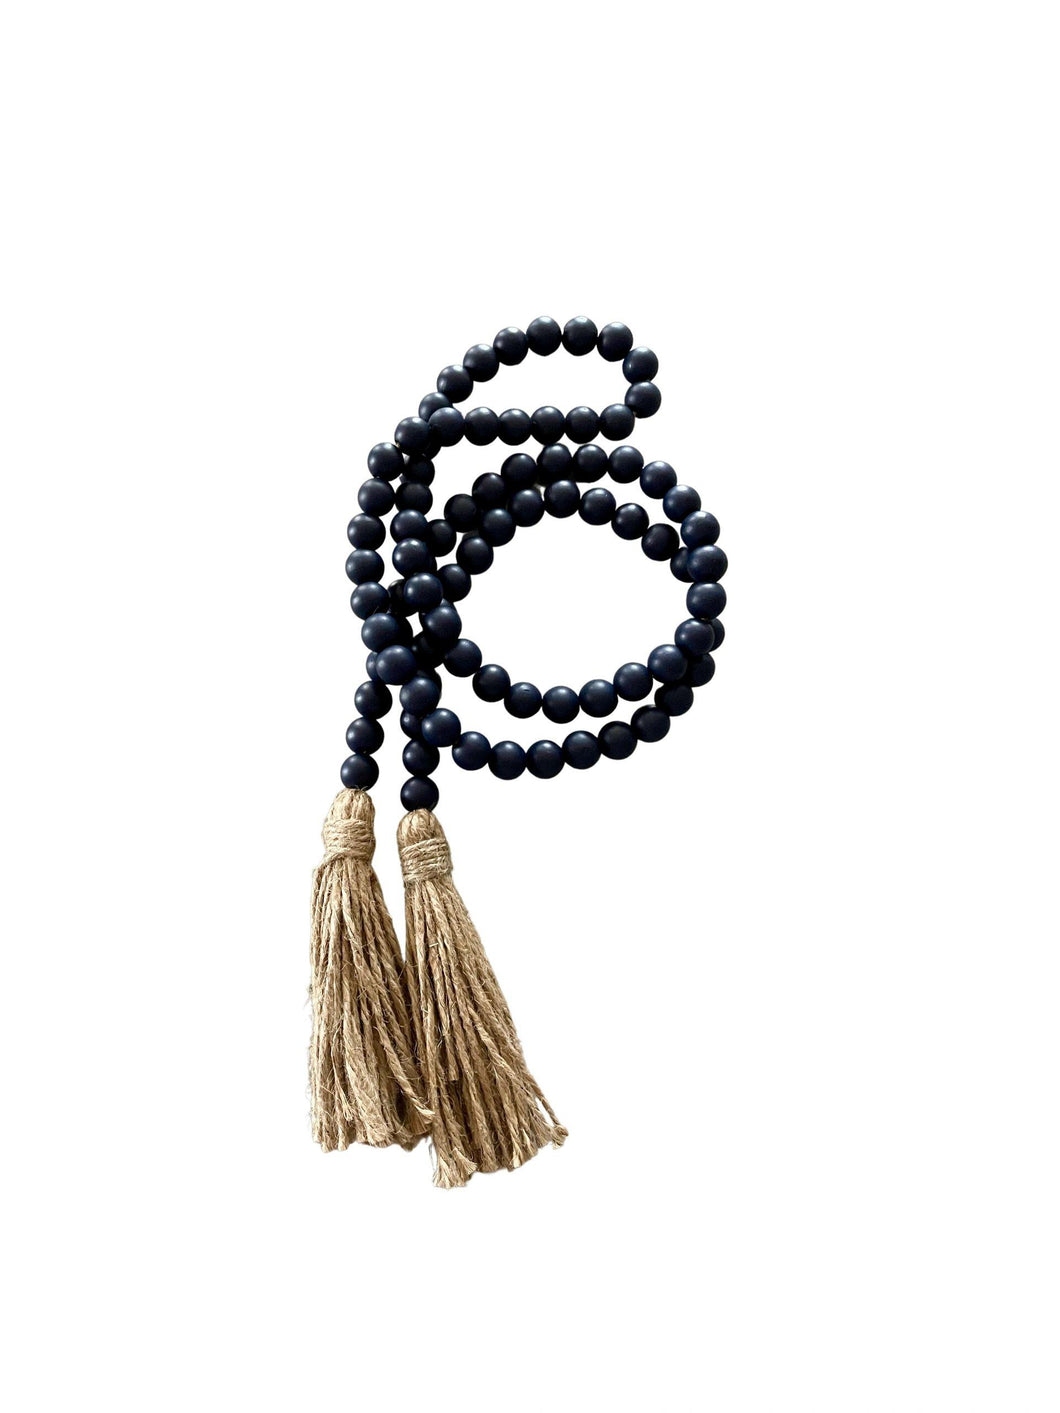 Wood Beads, Navy Blue with Jute Tassels, Small